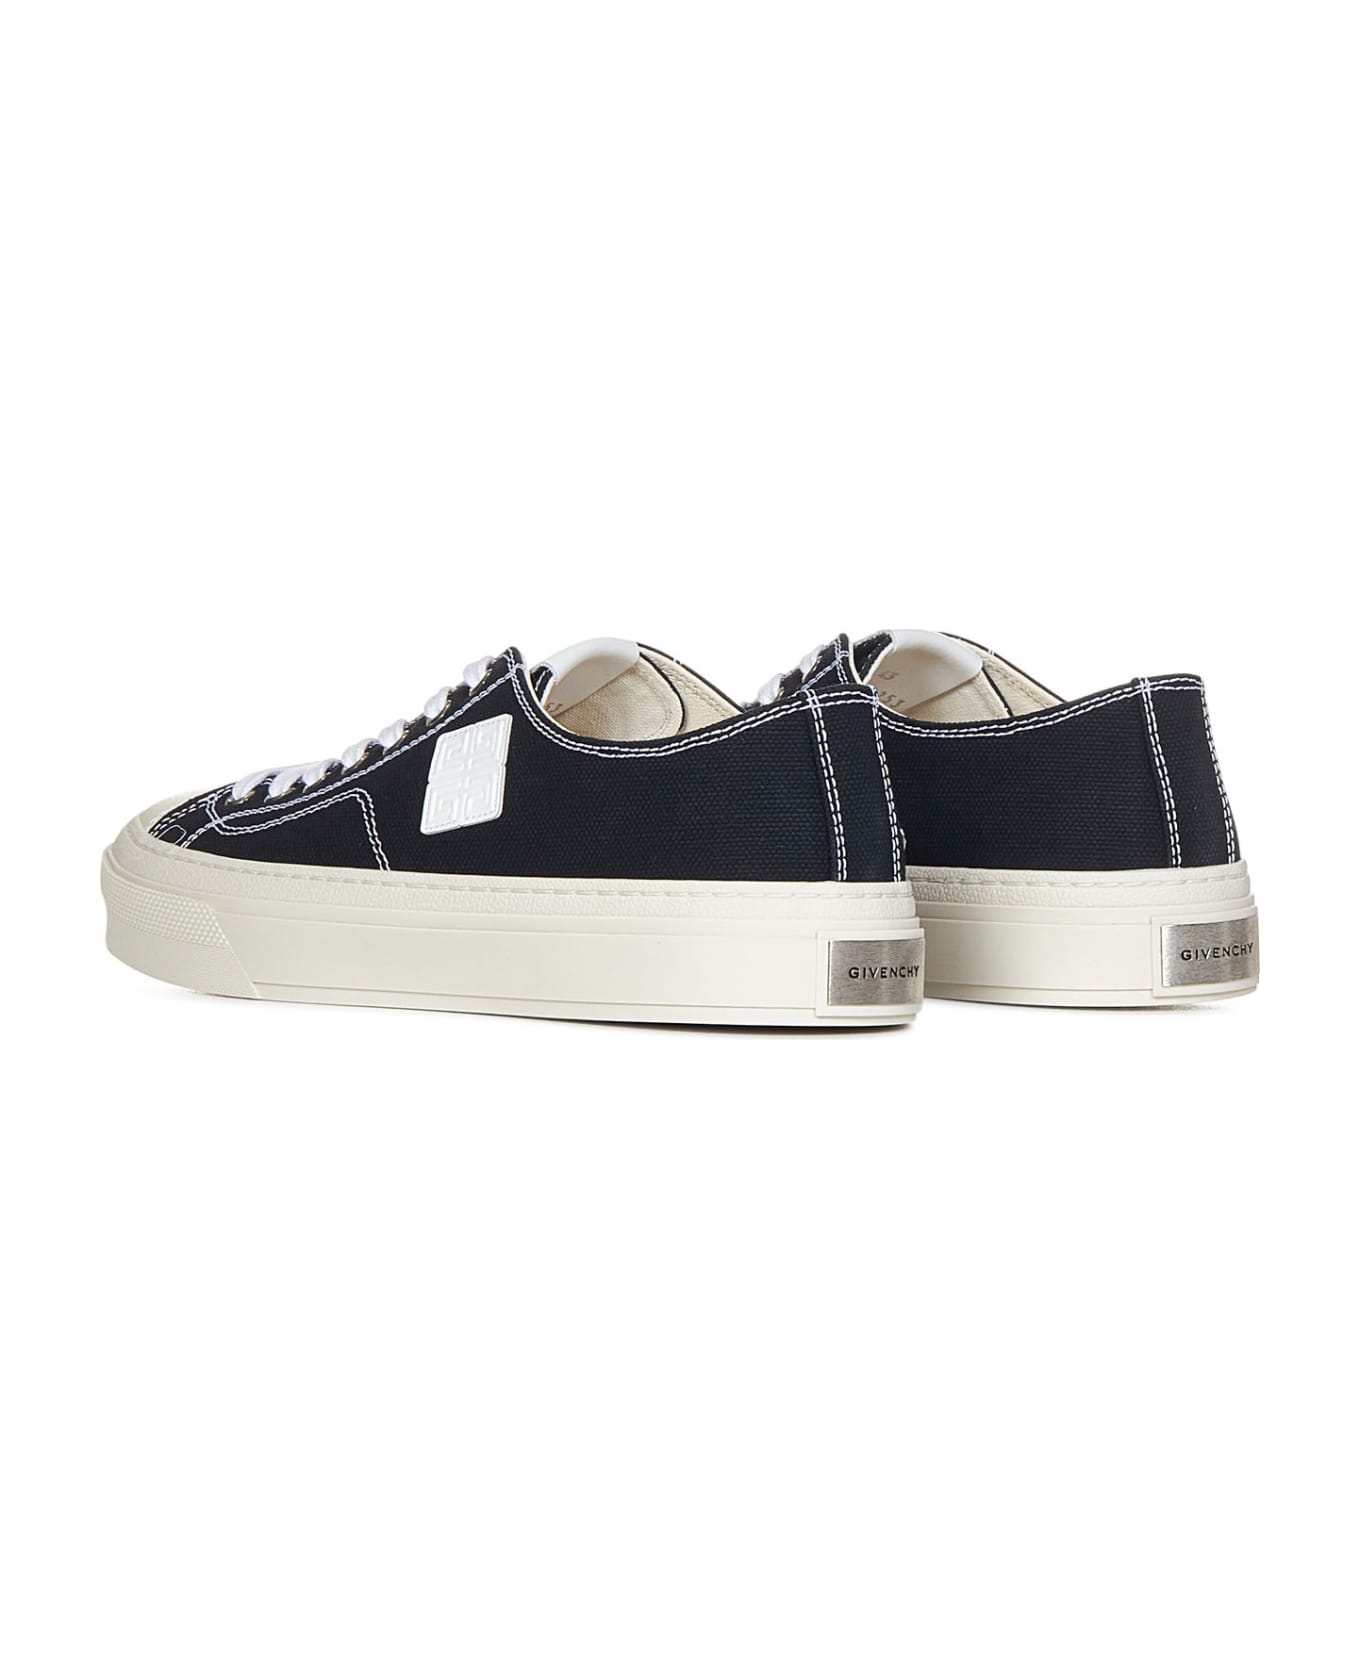 Givenchy City Sneakers - Black スニーカー